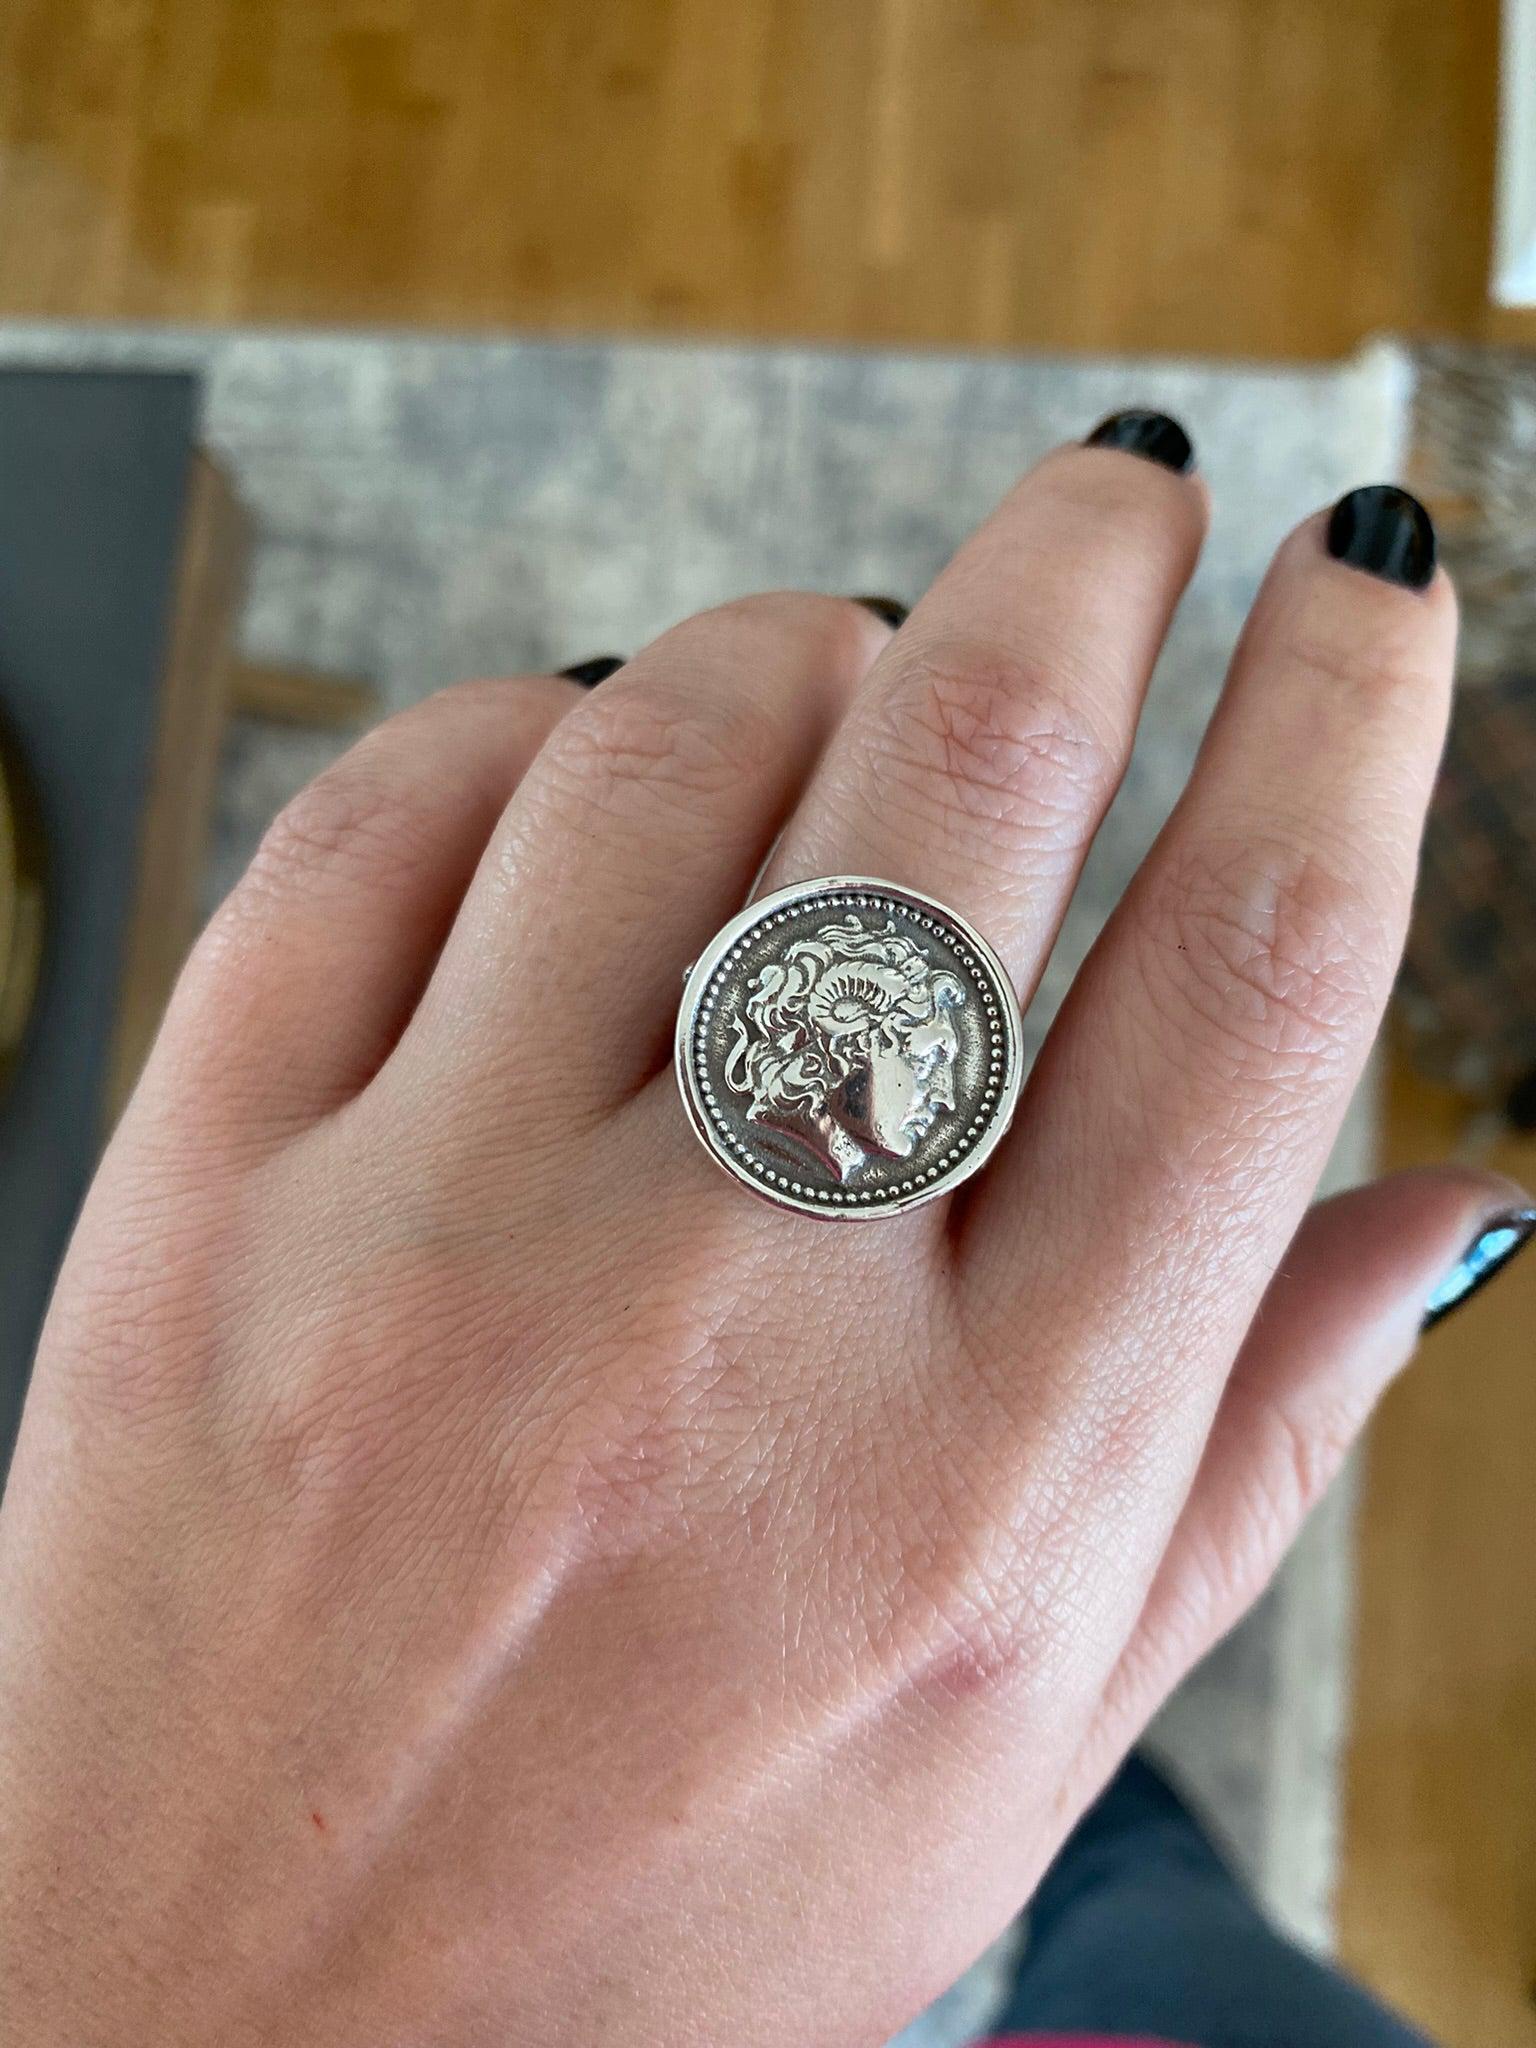 France 10 Franc Silver Coin Ring// Unique Personalized Custom Handmade  Antique Vintage Elegant Statement Boho Best Seller Man Coin Ring - Etsy | Silver  coin ring, Coin ring, Unique rings